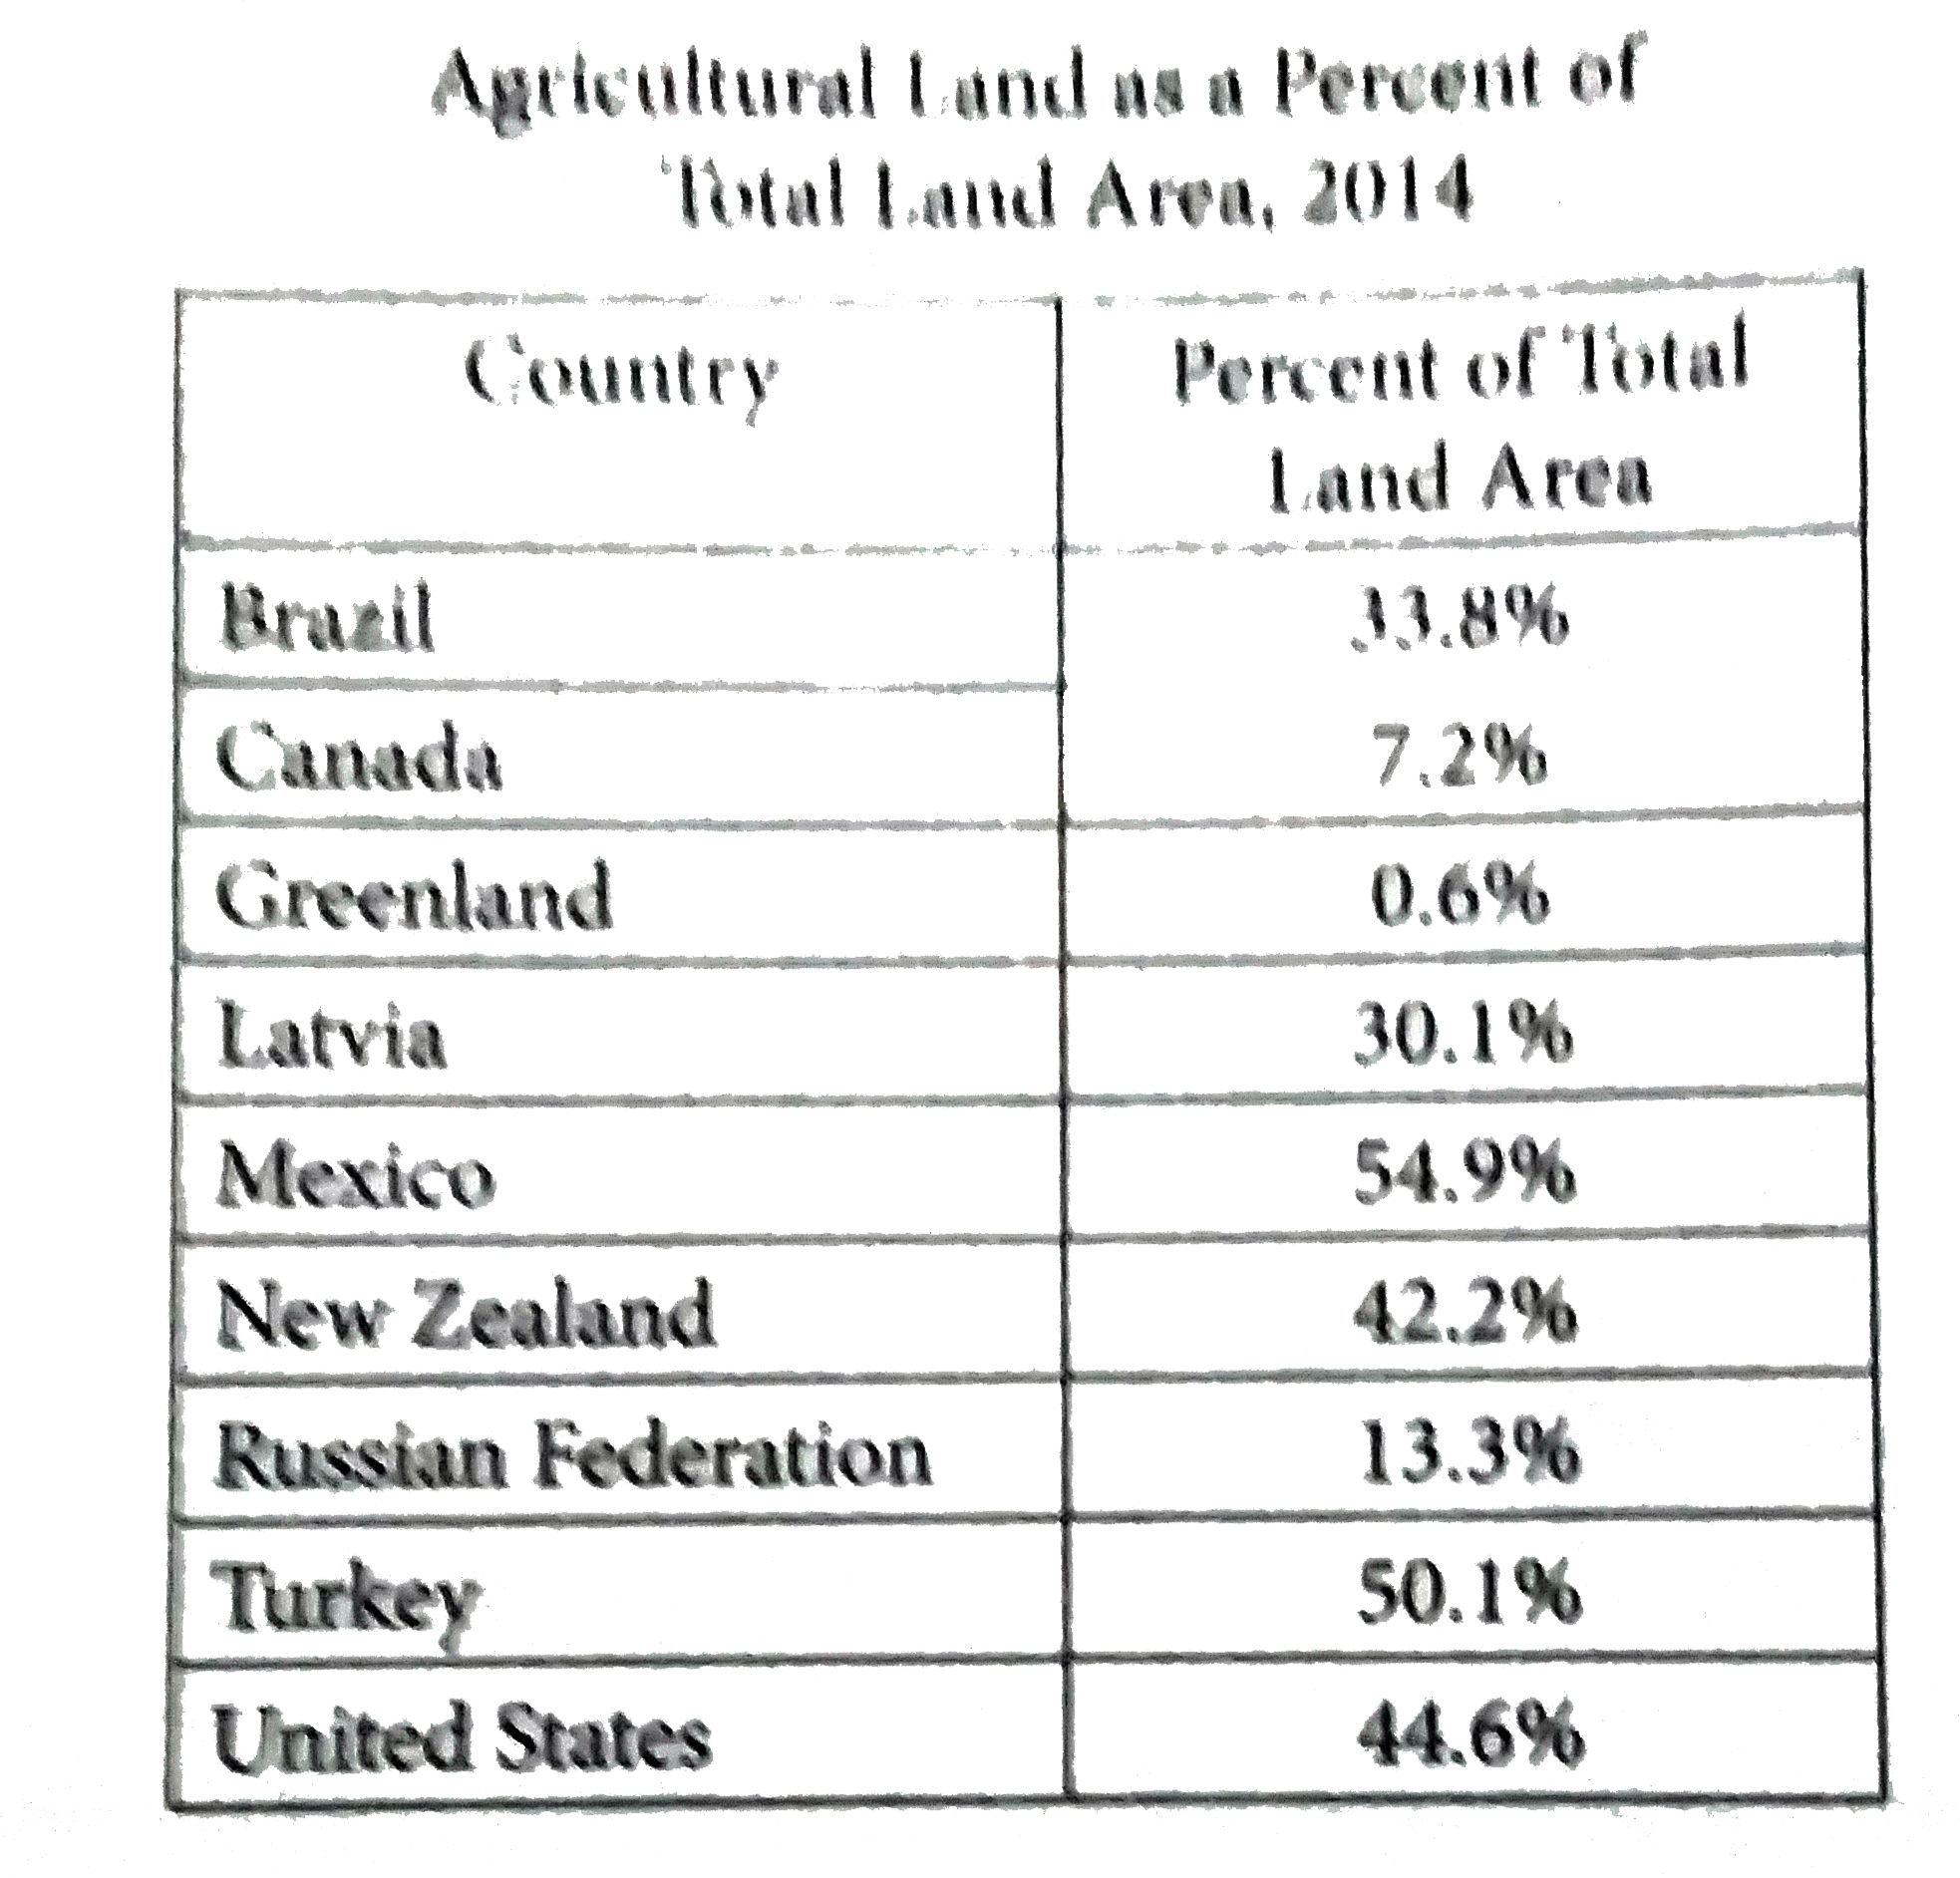 The world bank measures the amount of land devoted to agriculture among all 196 countries  in the world. The results from 9 of the countries are given in the table above. The median percent of of agrilcultural land for all 196 countries  in 34.95%. What is the difference between the median percent of agricultural land for these 9 countries and the median for all 196 countries?